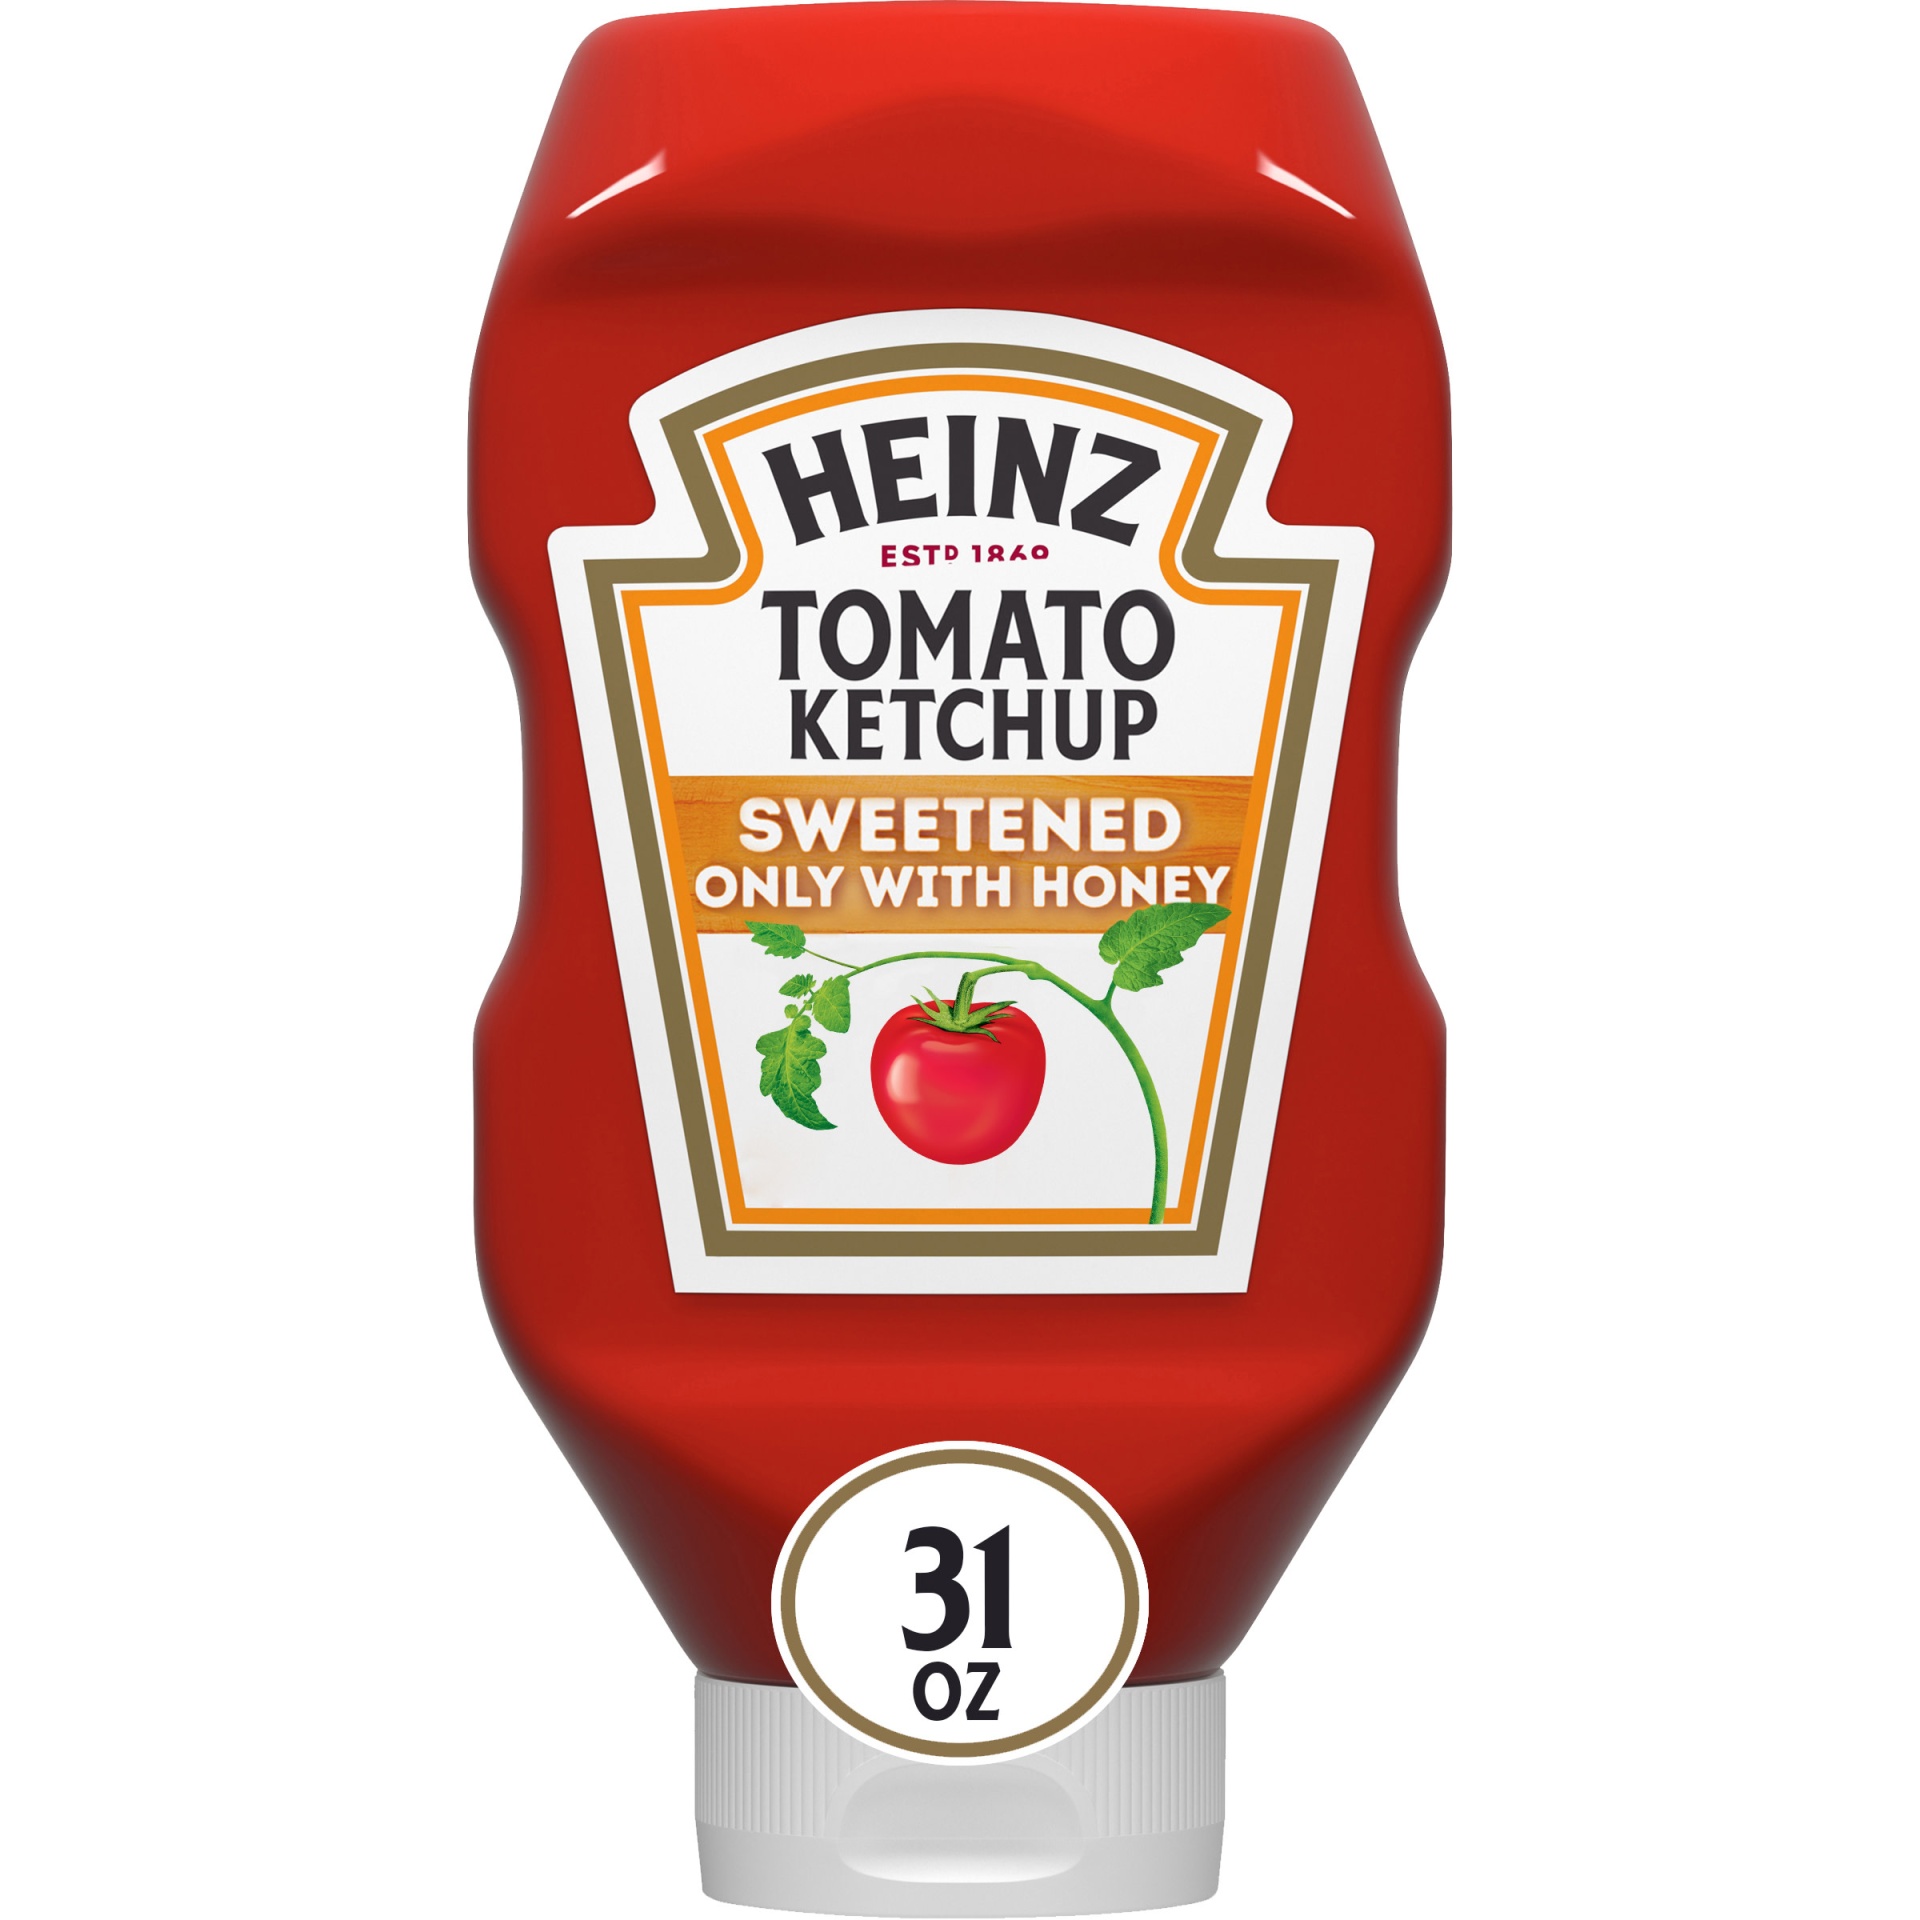 slide 1 of 1, Heinz Tomato Ketchup Sweetened Only with Honey Bottle, 31 oz